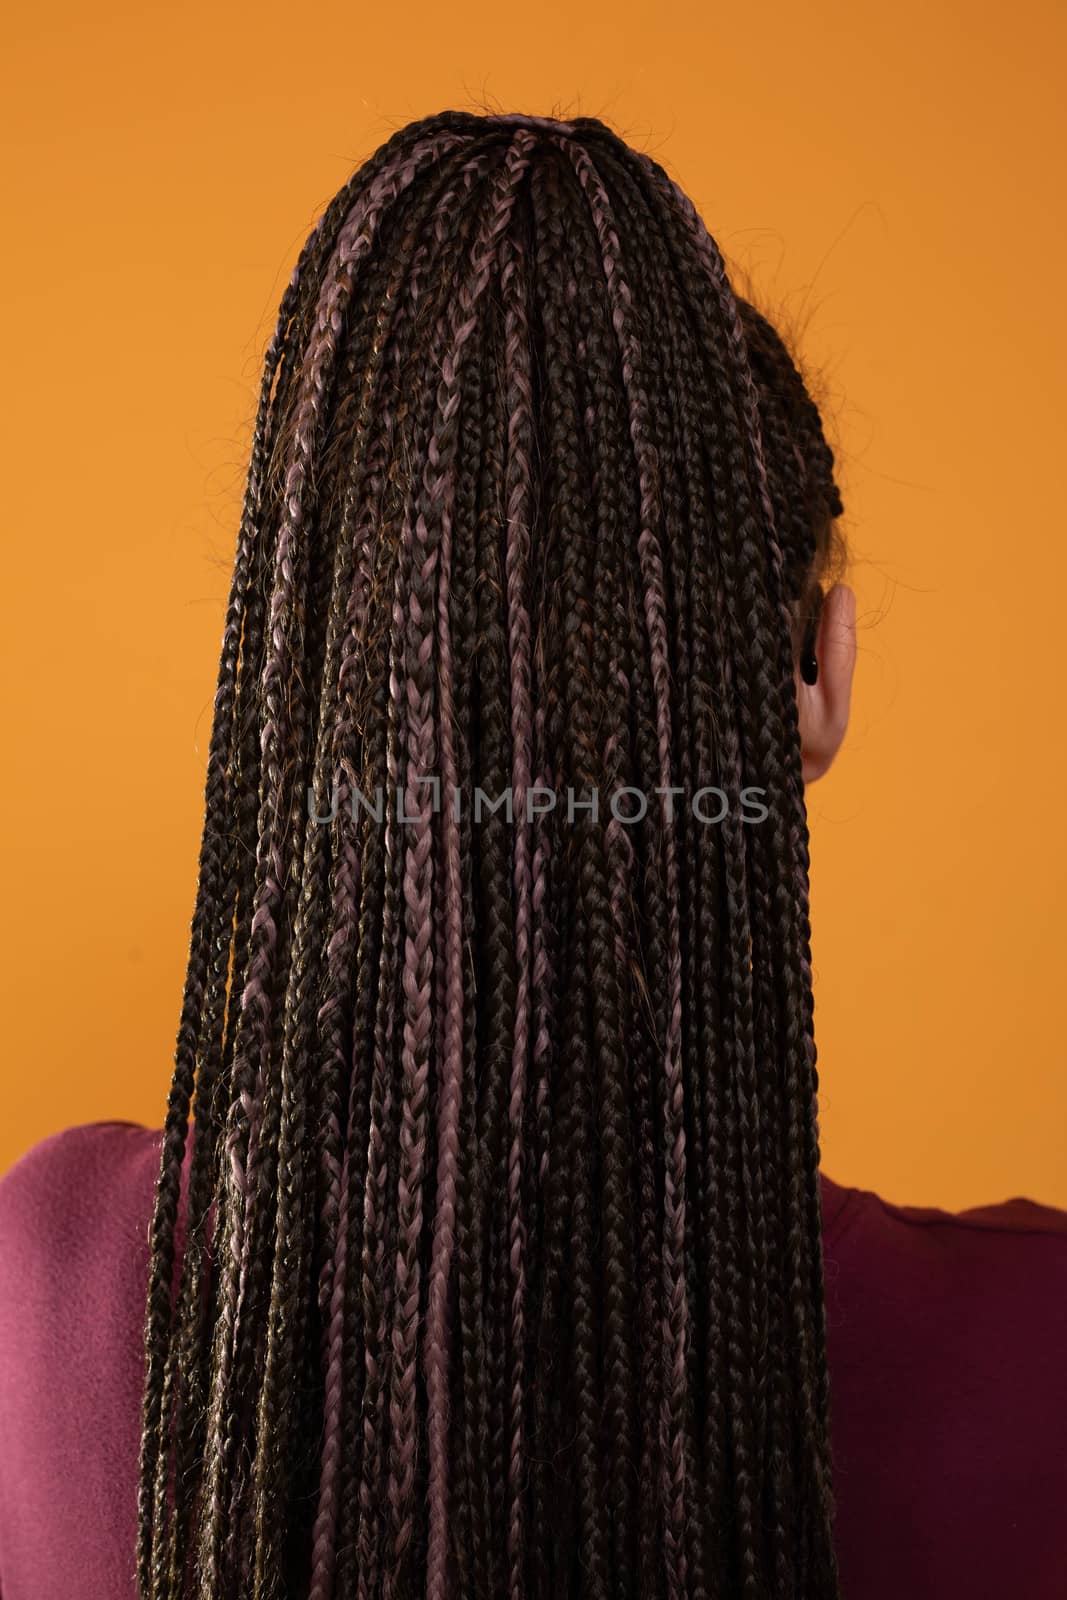 Braids intertwined on the head of a young girl. Back view of loose hair all in small pigtails.